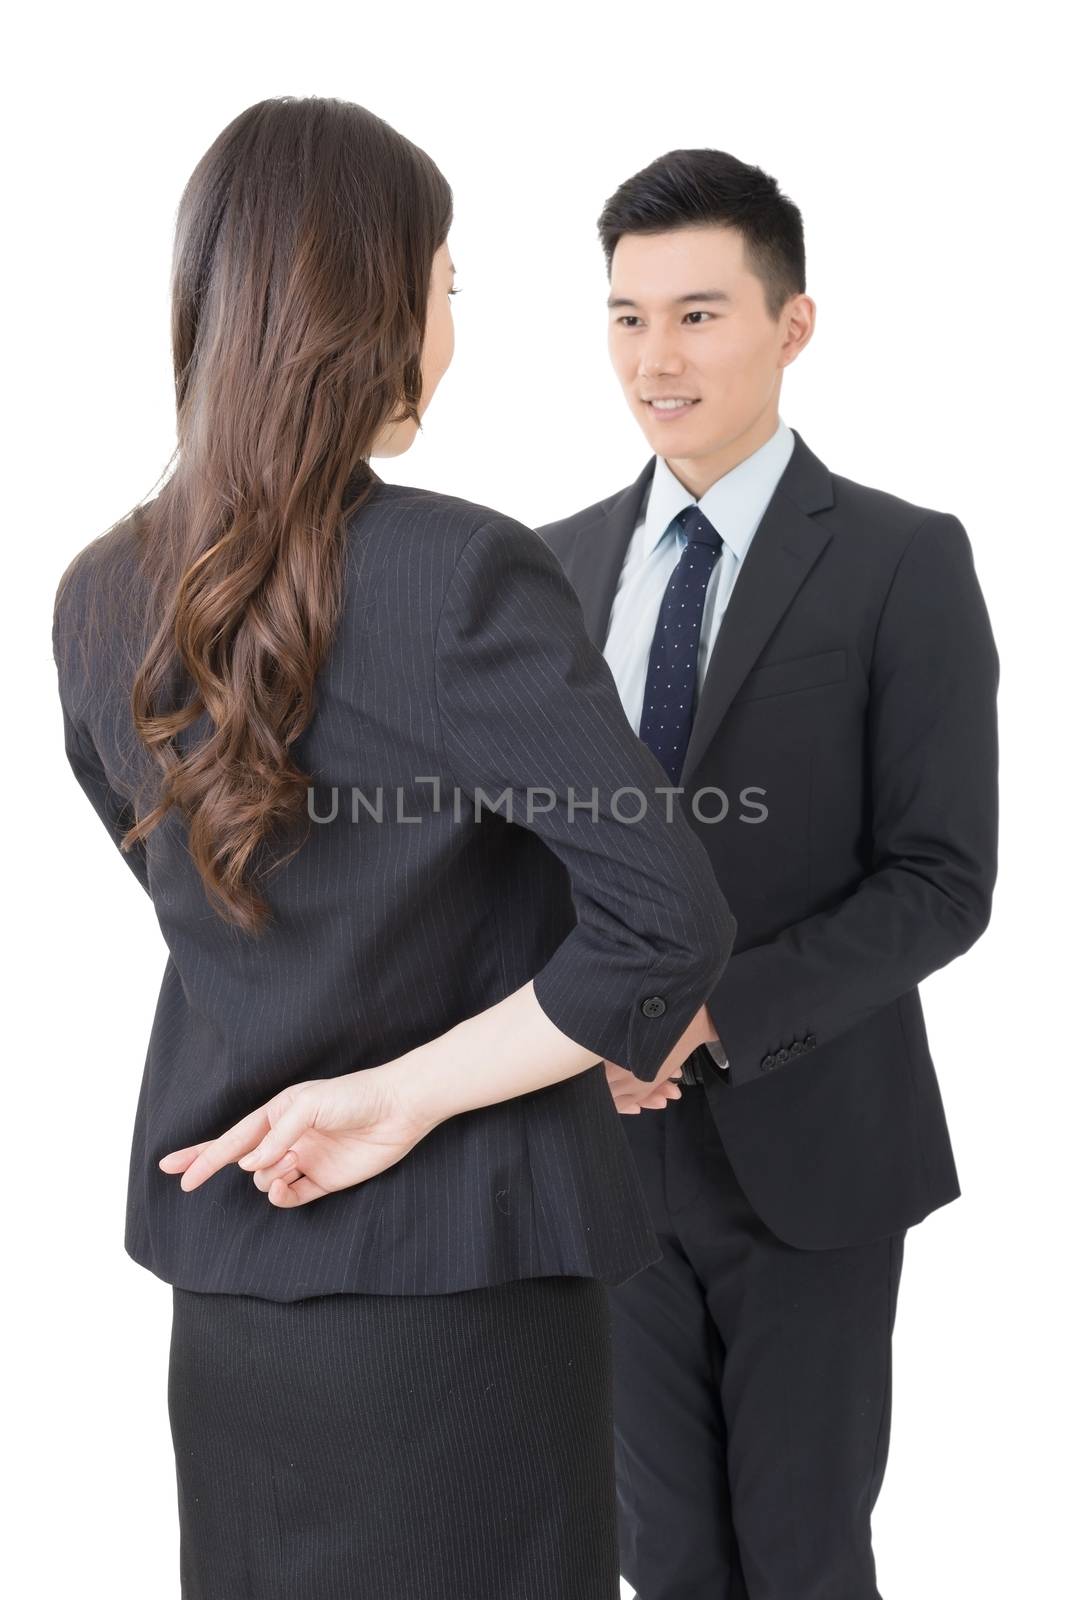 Business woman and man shake hands and put finger cross on back, closeup portrait isolated on white background.